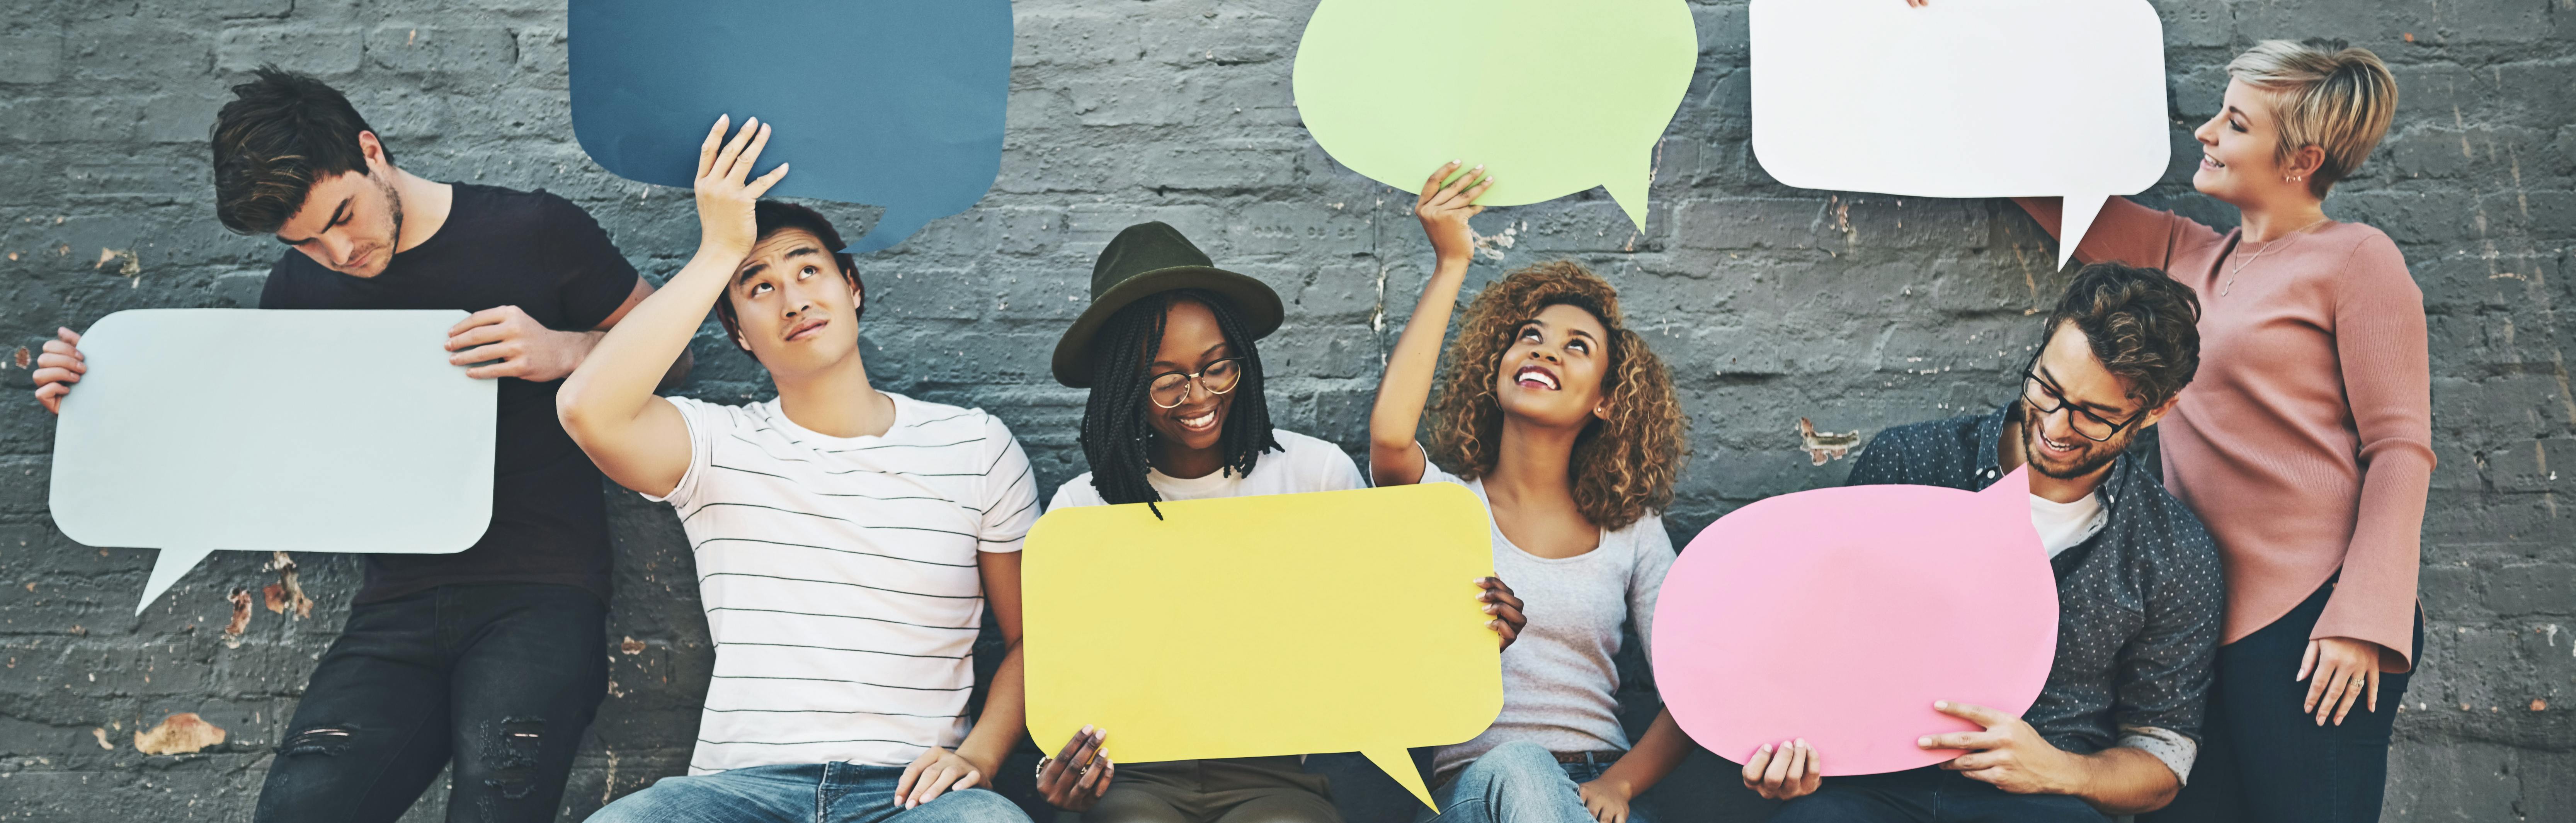 Six young adults against a brick wall holding up speech bubbles and enjoying the conversation.